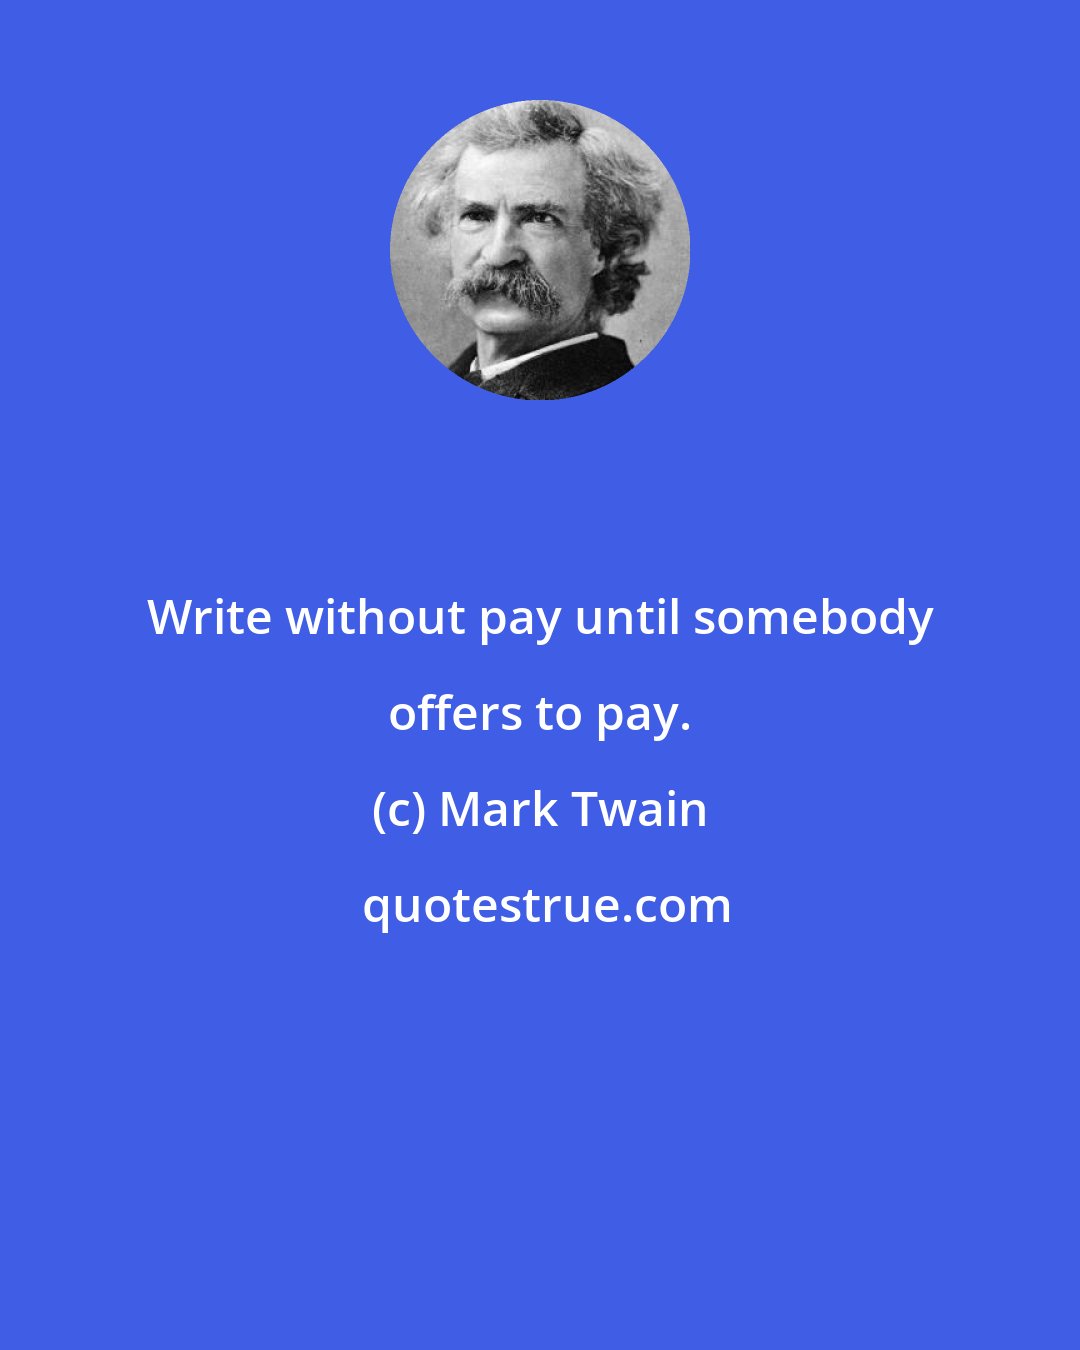 Mark Twain: Write without pay until somebody offers to pay.